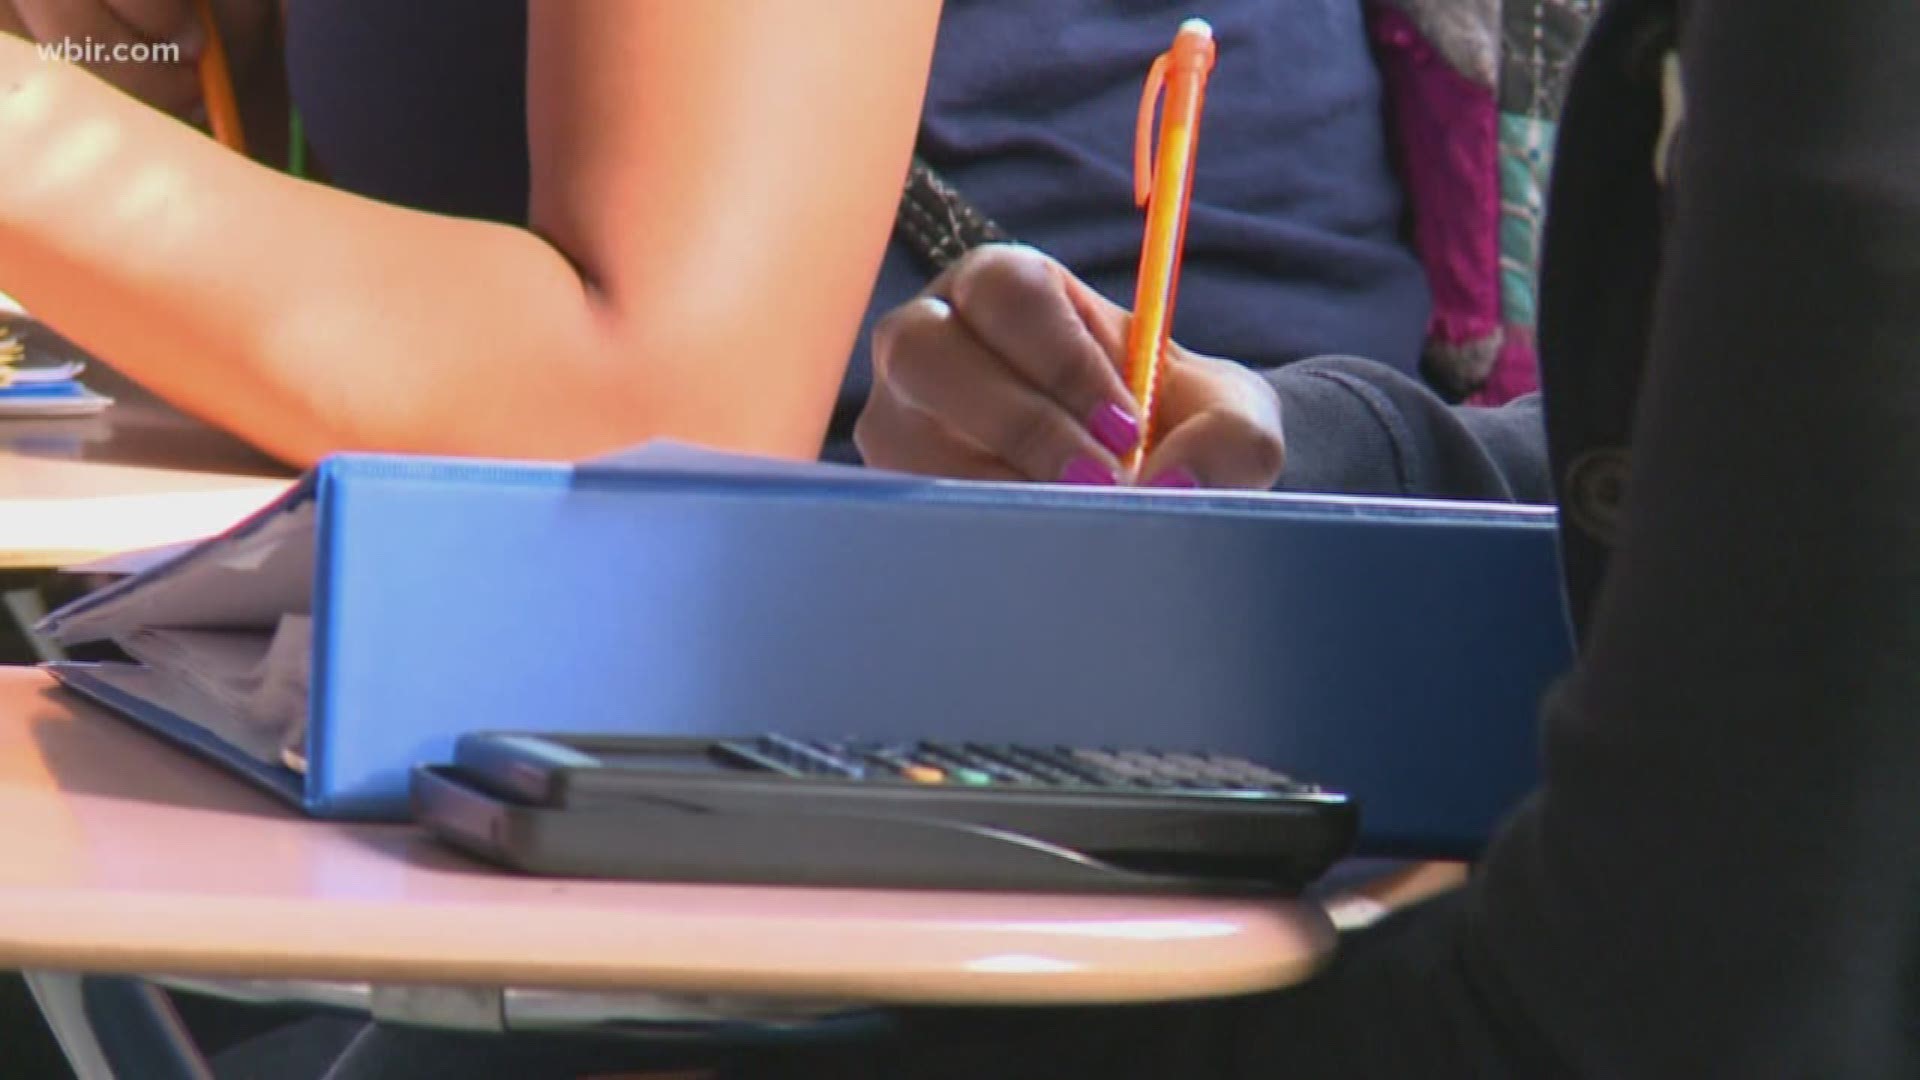 Some districts, including Knox County schools, said they would suspend testing for the day.